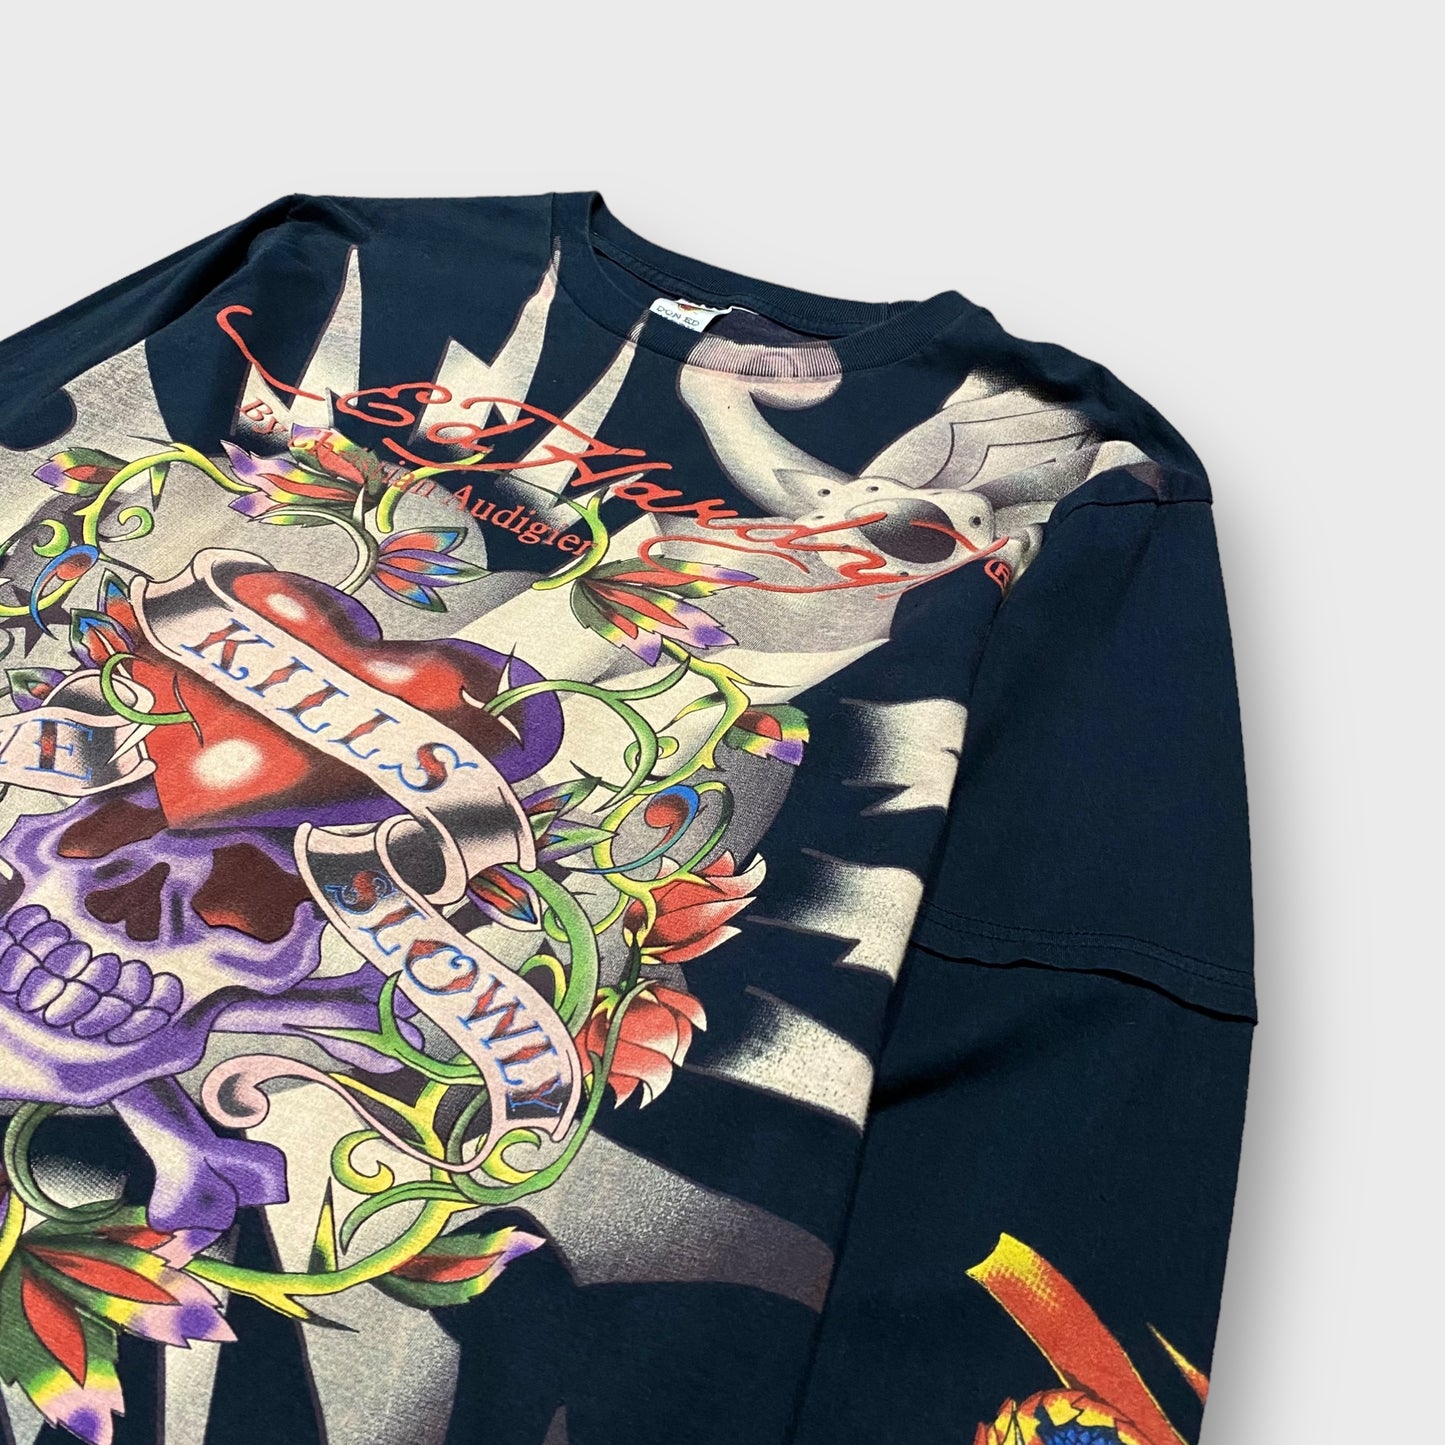 "Ed Hardy" American traditional design l/s t-shirt